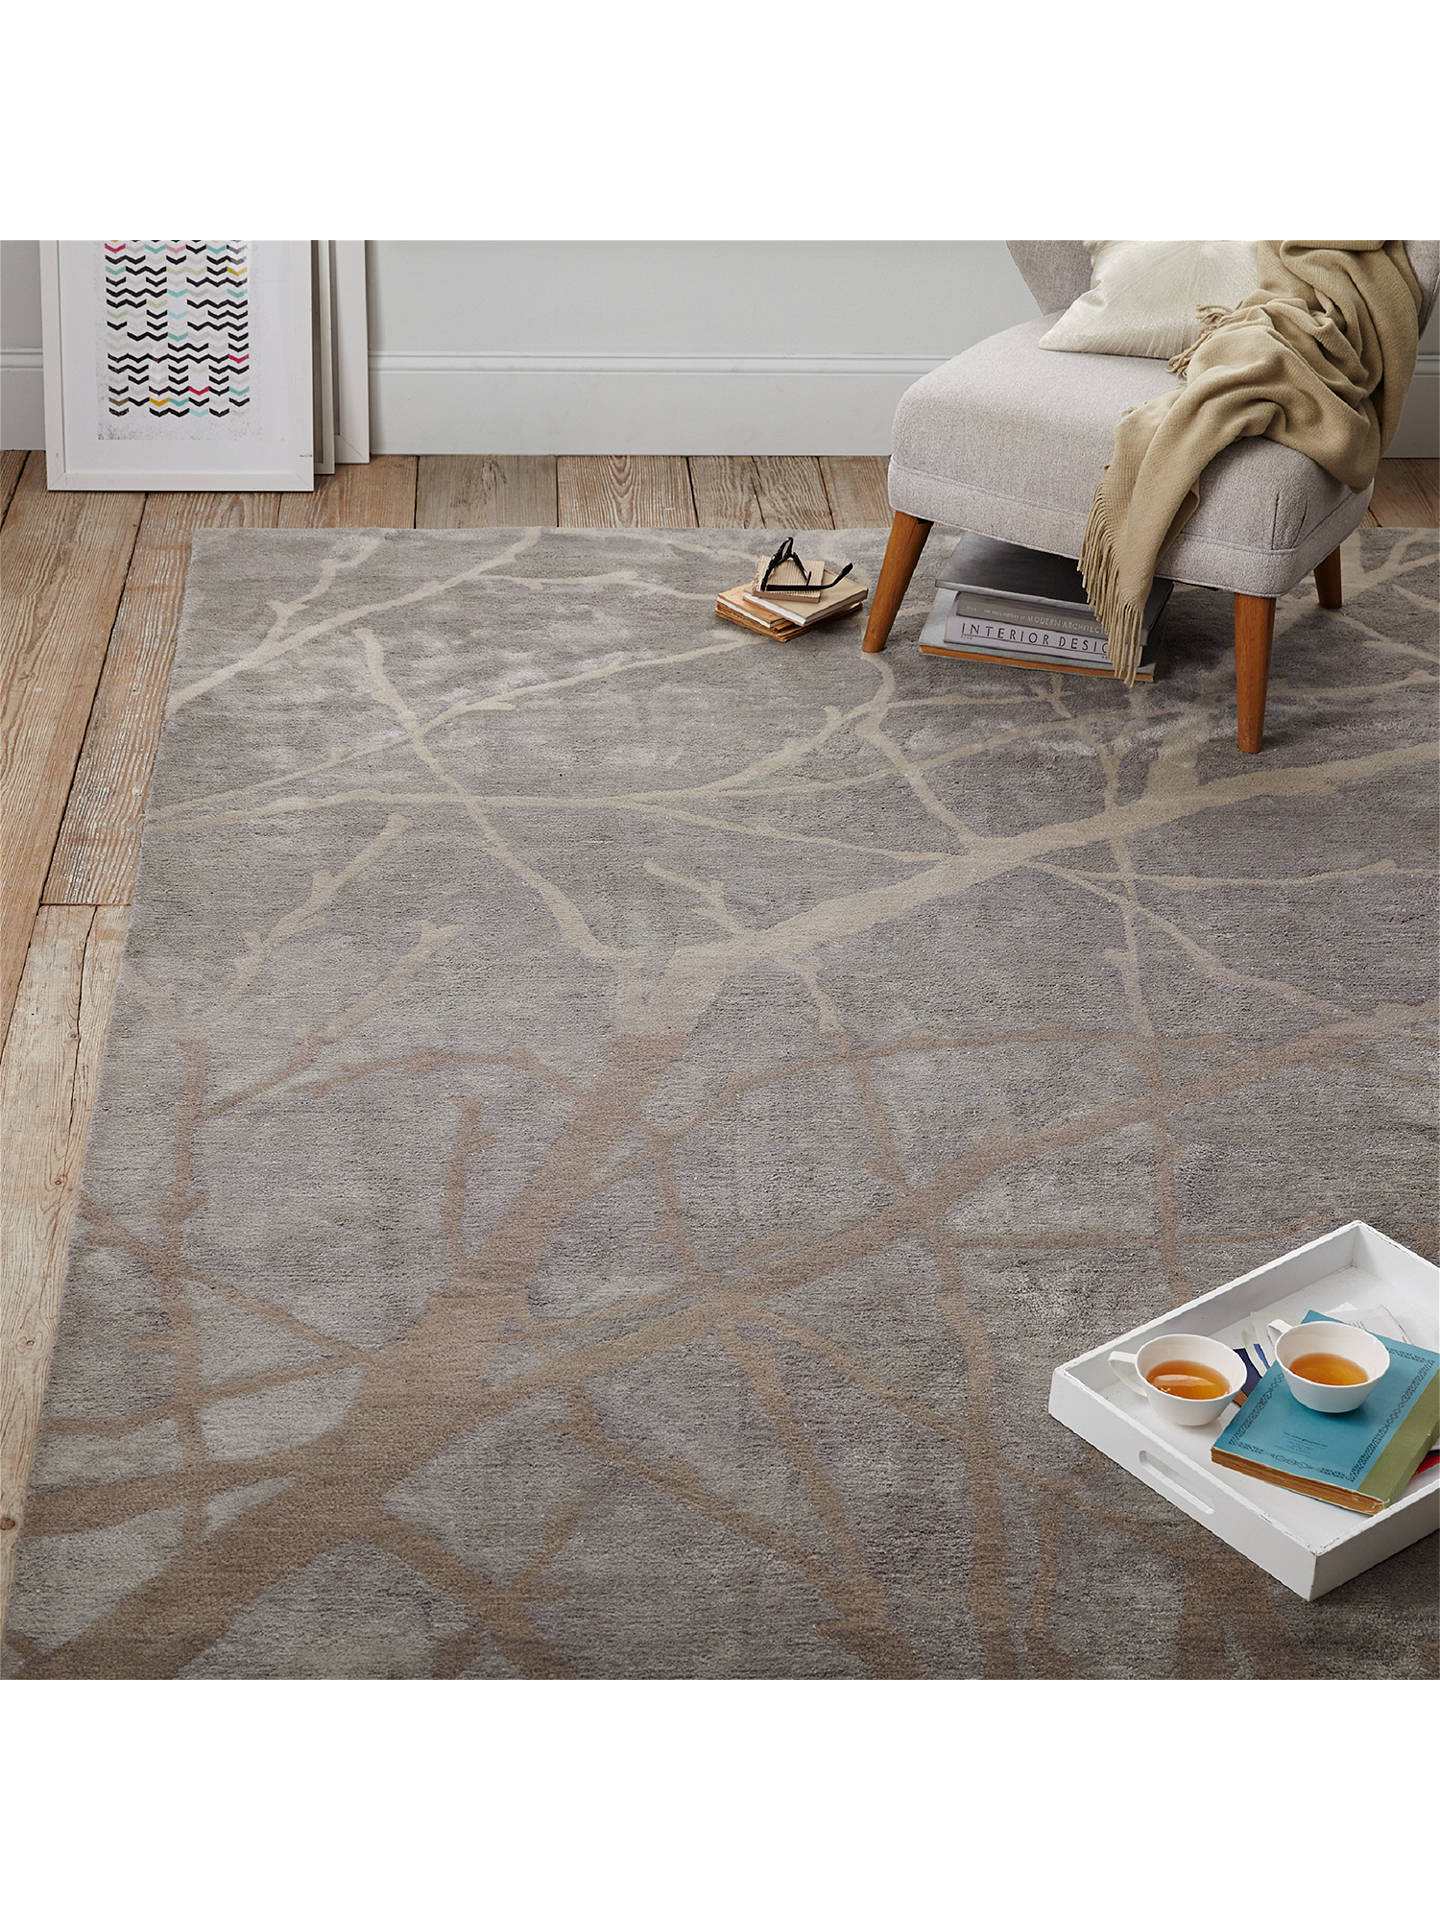 west elm Winter Branches Rug, Grey at John Lewis & Partners